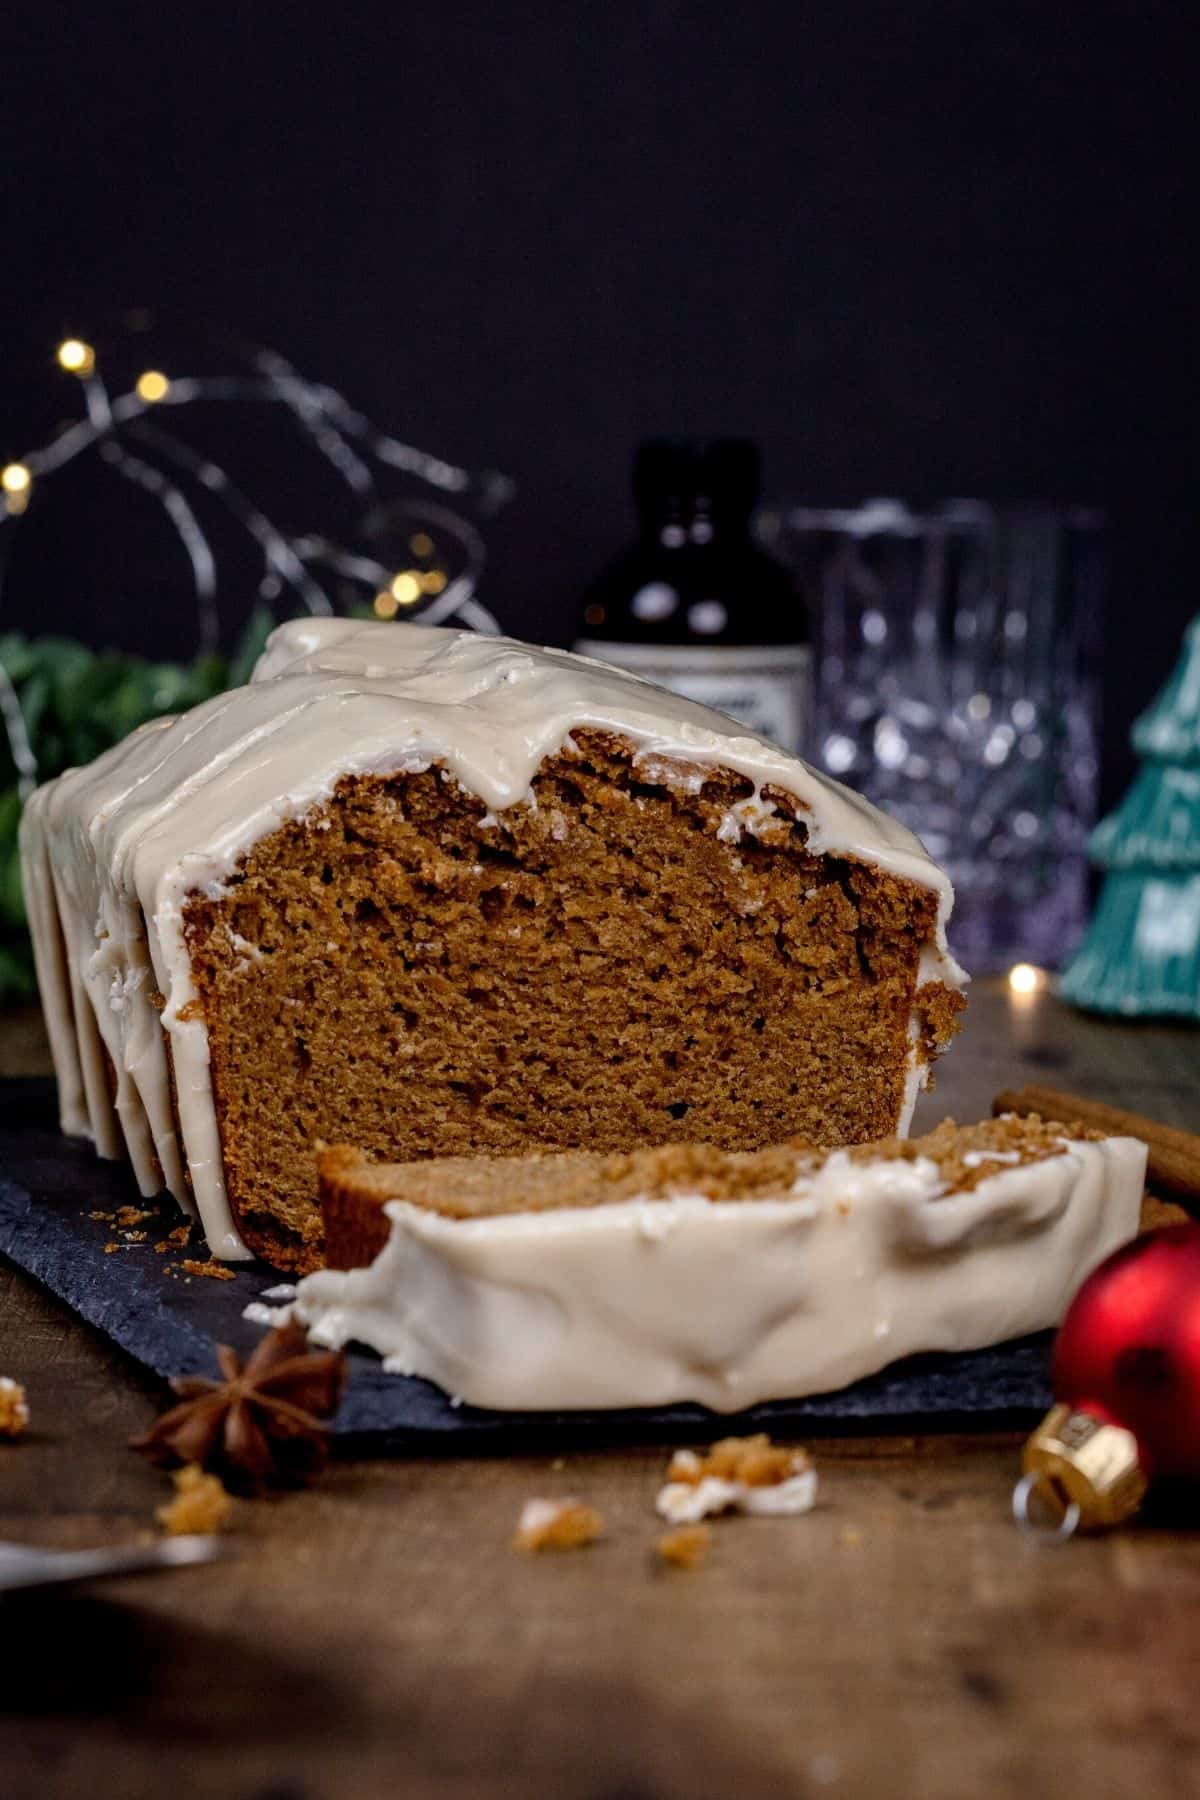 ¾ view of a sliced loaf cake with a slice in front. crumbs surround the cake, as well as spices and Christmas decor. lights are blurred in the background.